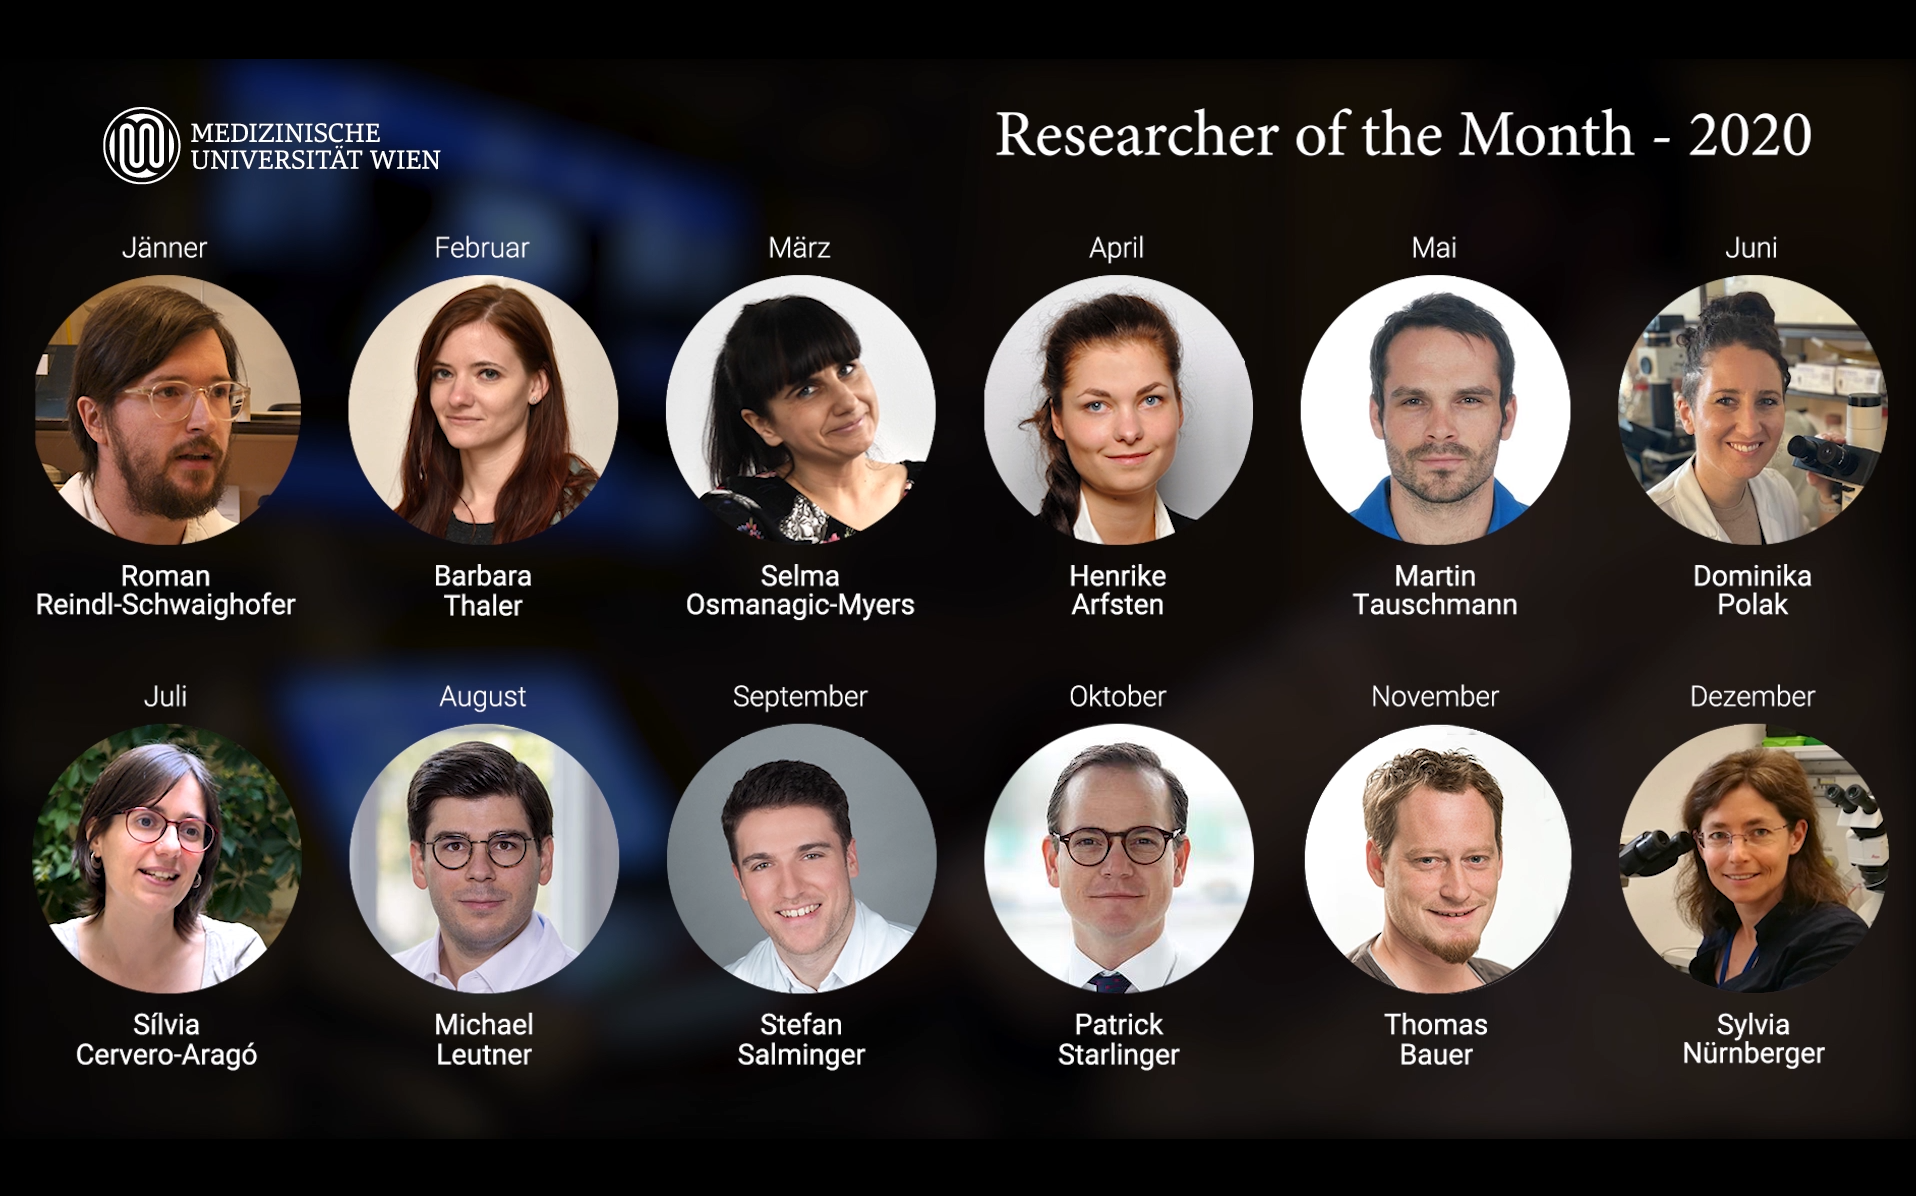 Researcher of the Month 2020